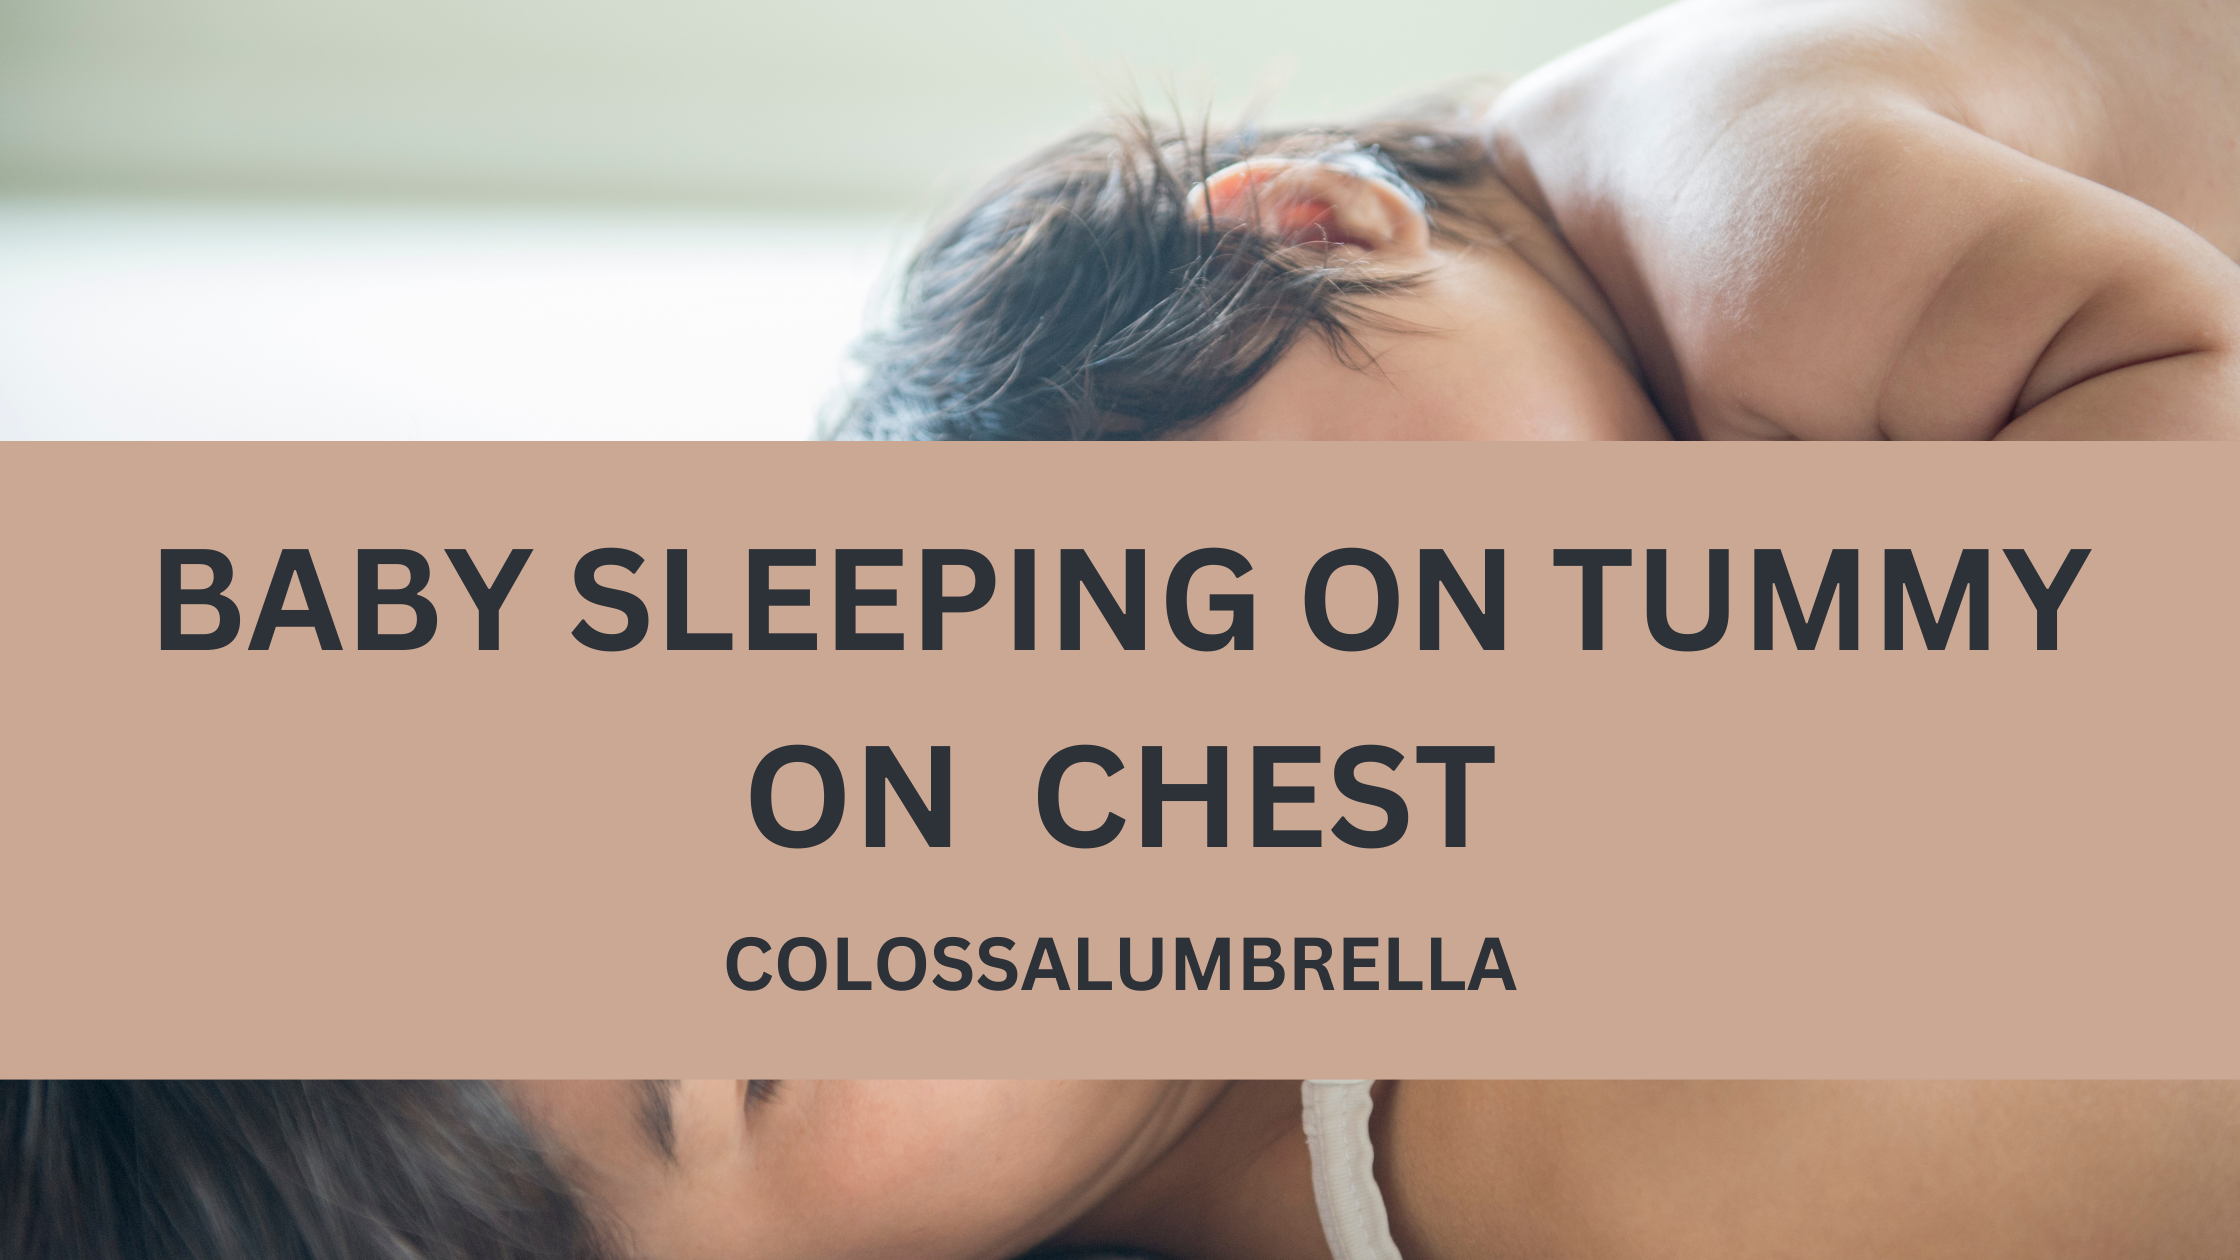 Baby sleeping on tummy on my chest -10 Benefits and Safety Guidelines